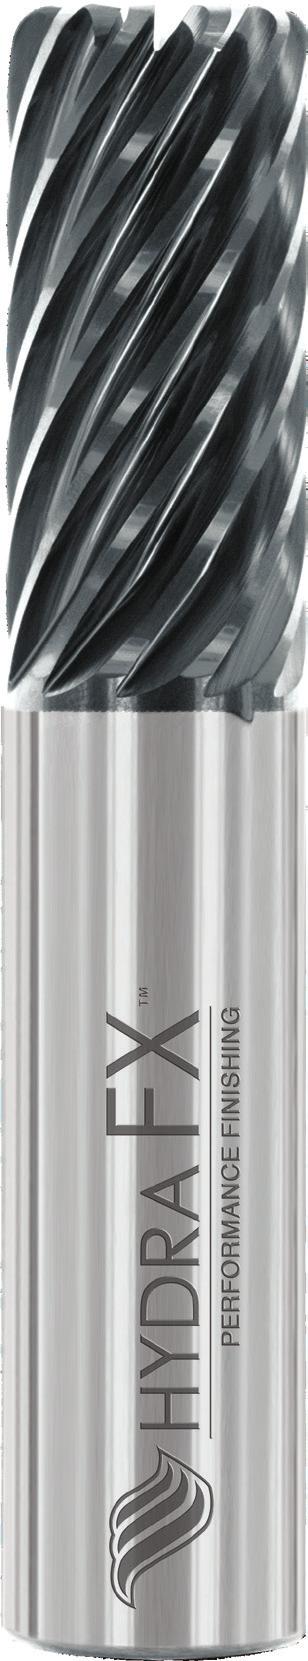 PERFORMANCE END MILLS FOR TIGHT TOLERANCE